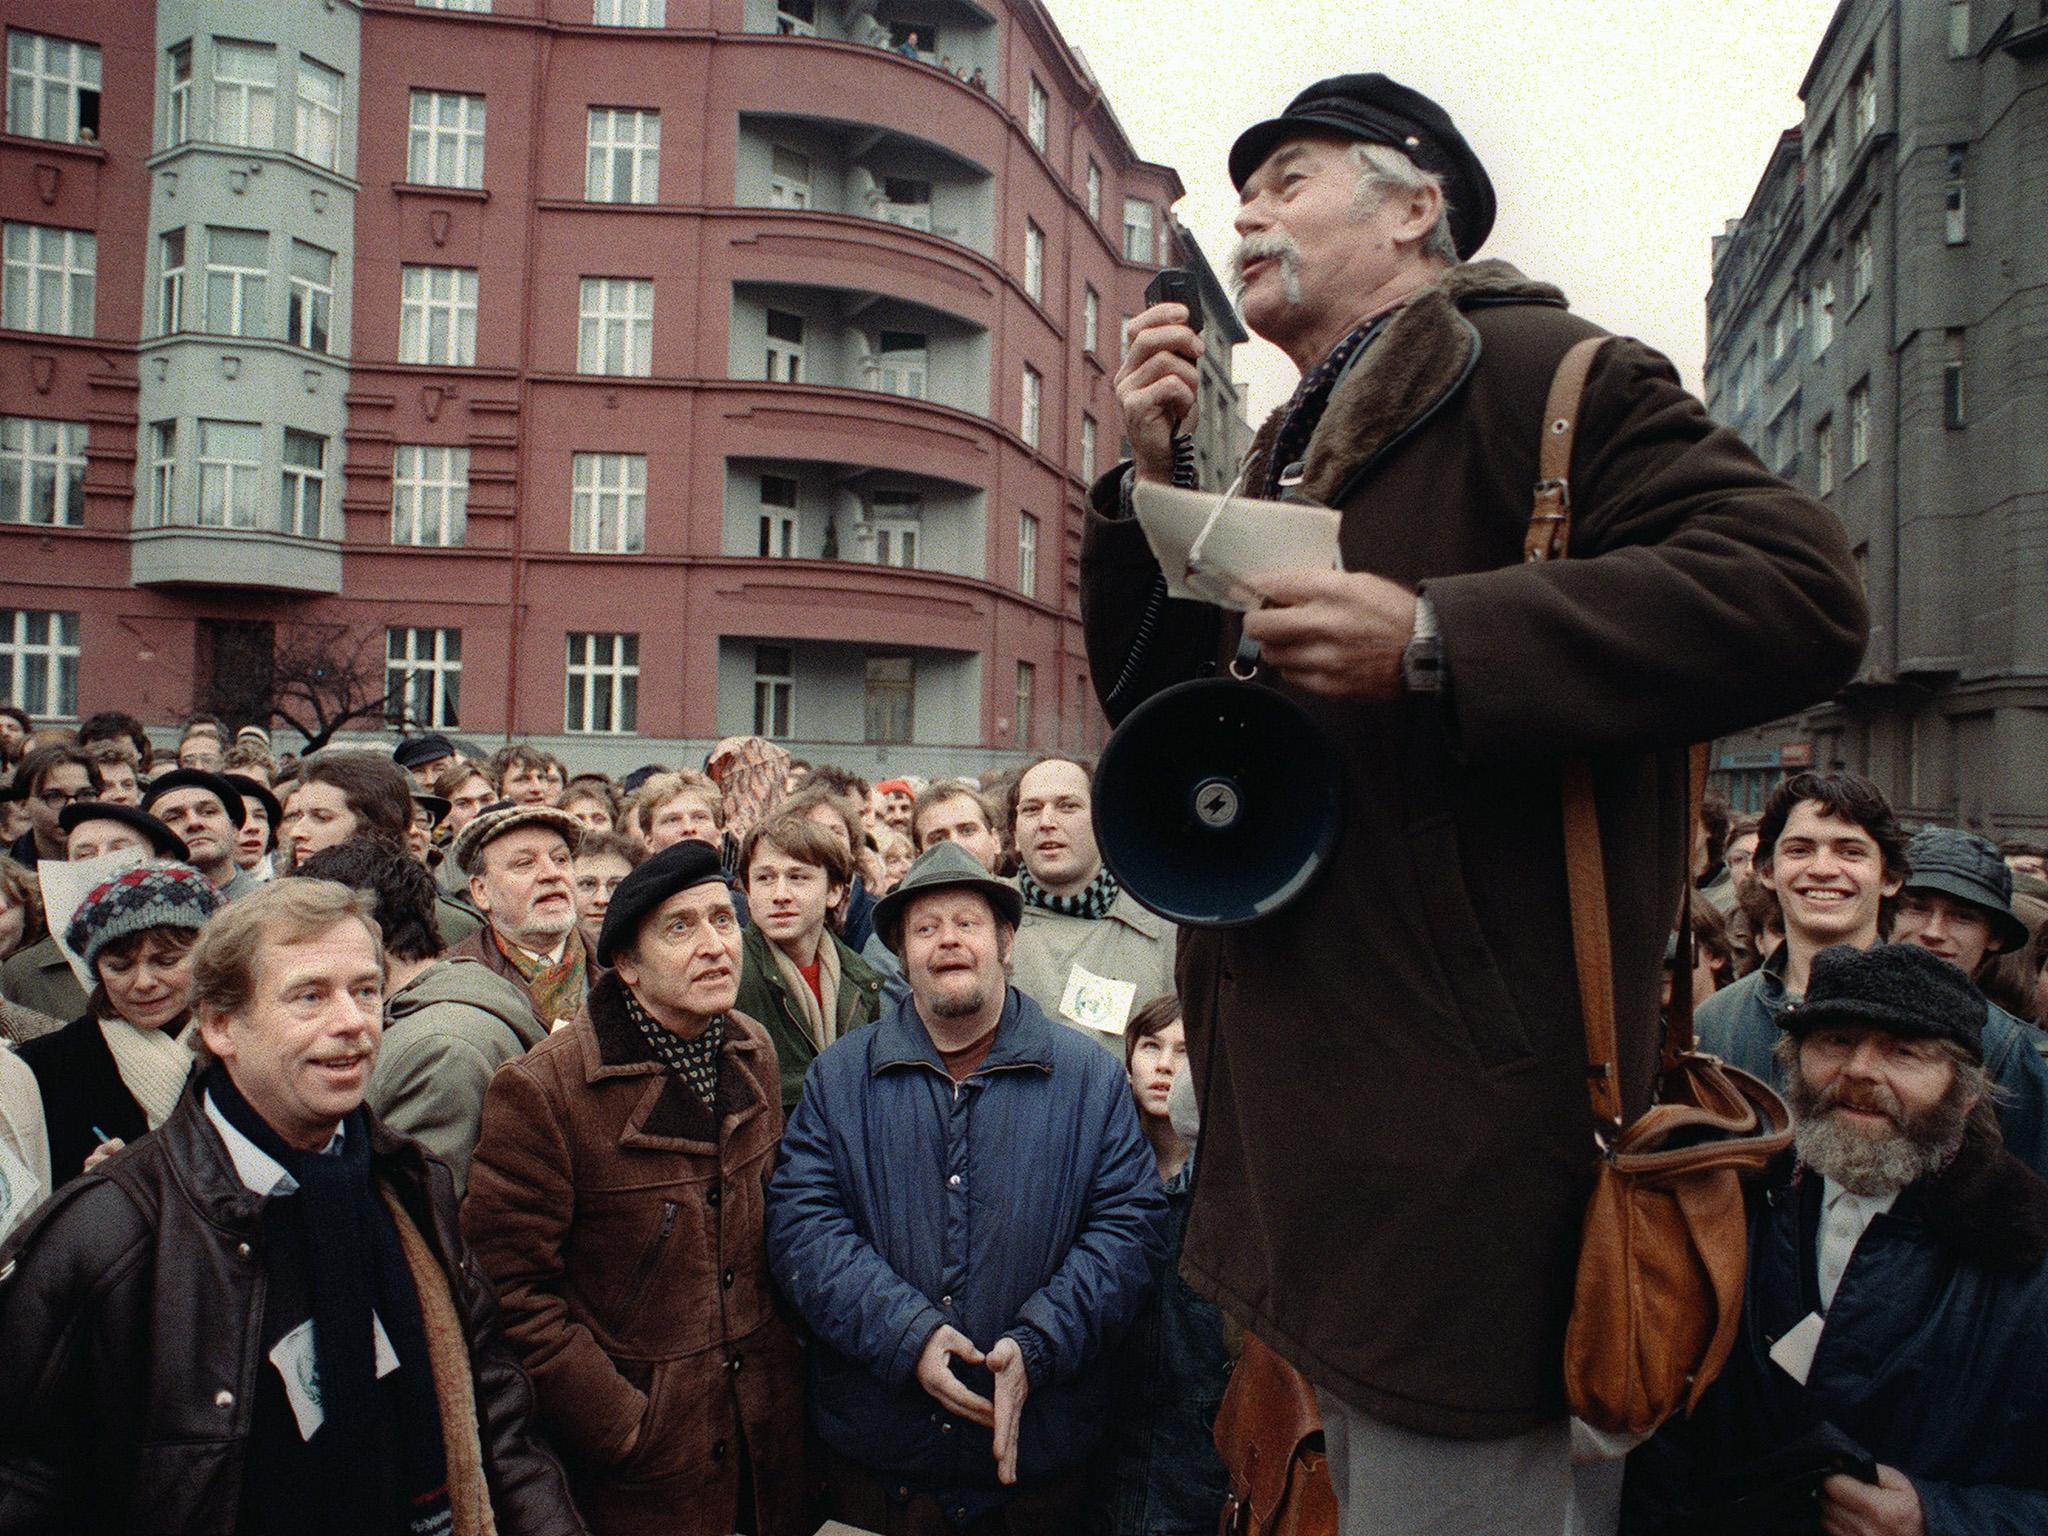 Vaclav Havel (left), a dissident playwright, and Rudolf Batek listen to Ladislav Lis address a crowd of demonstrators in 1988 in Prague (AFP/Getty)